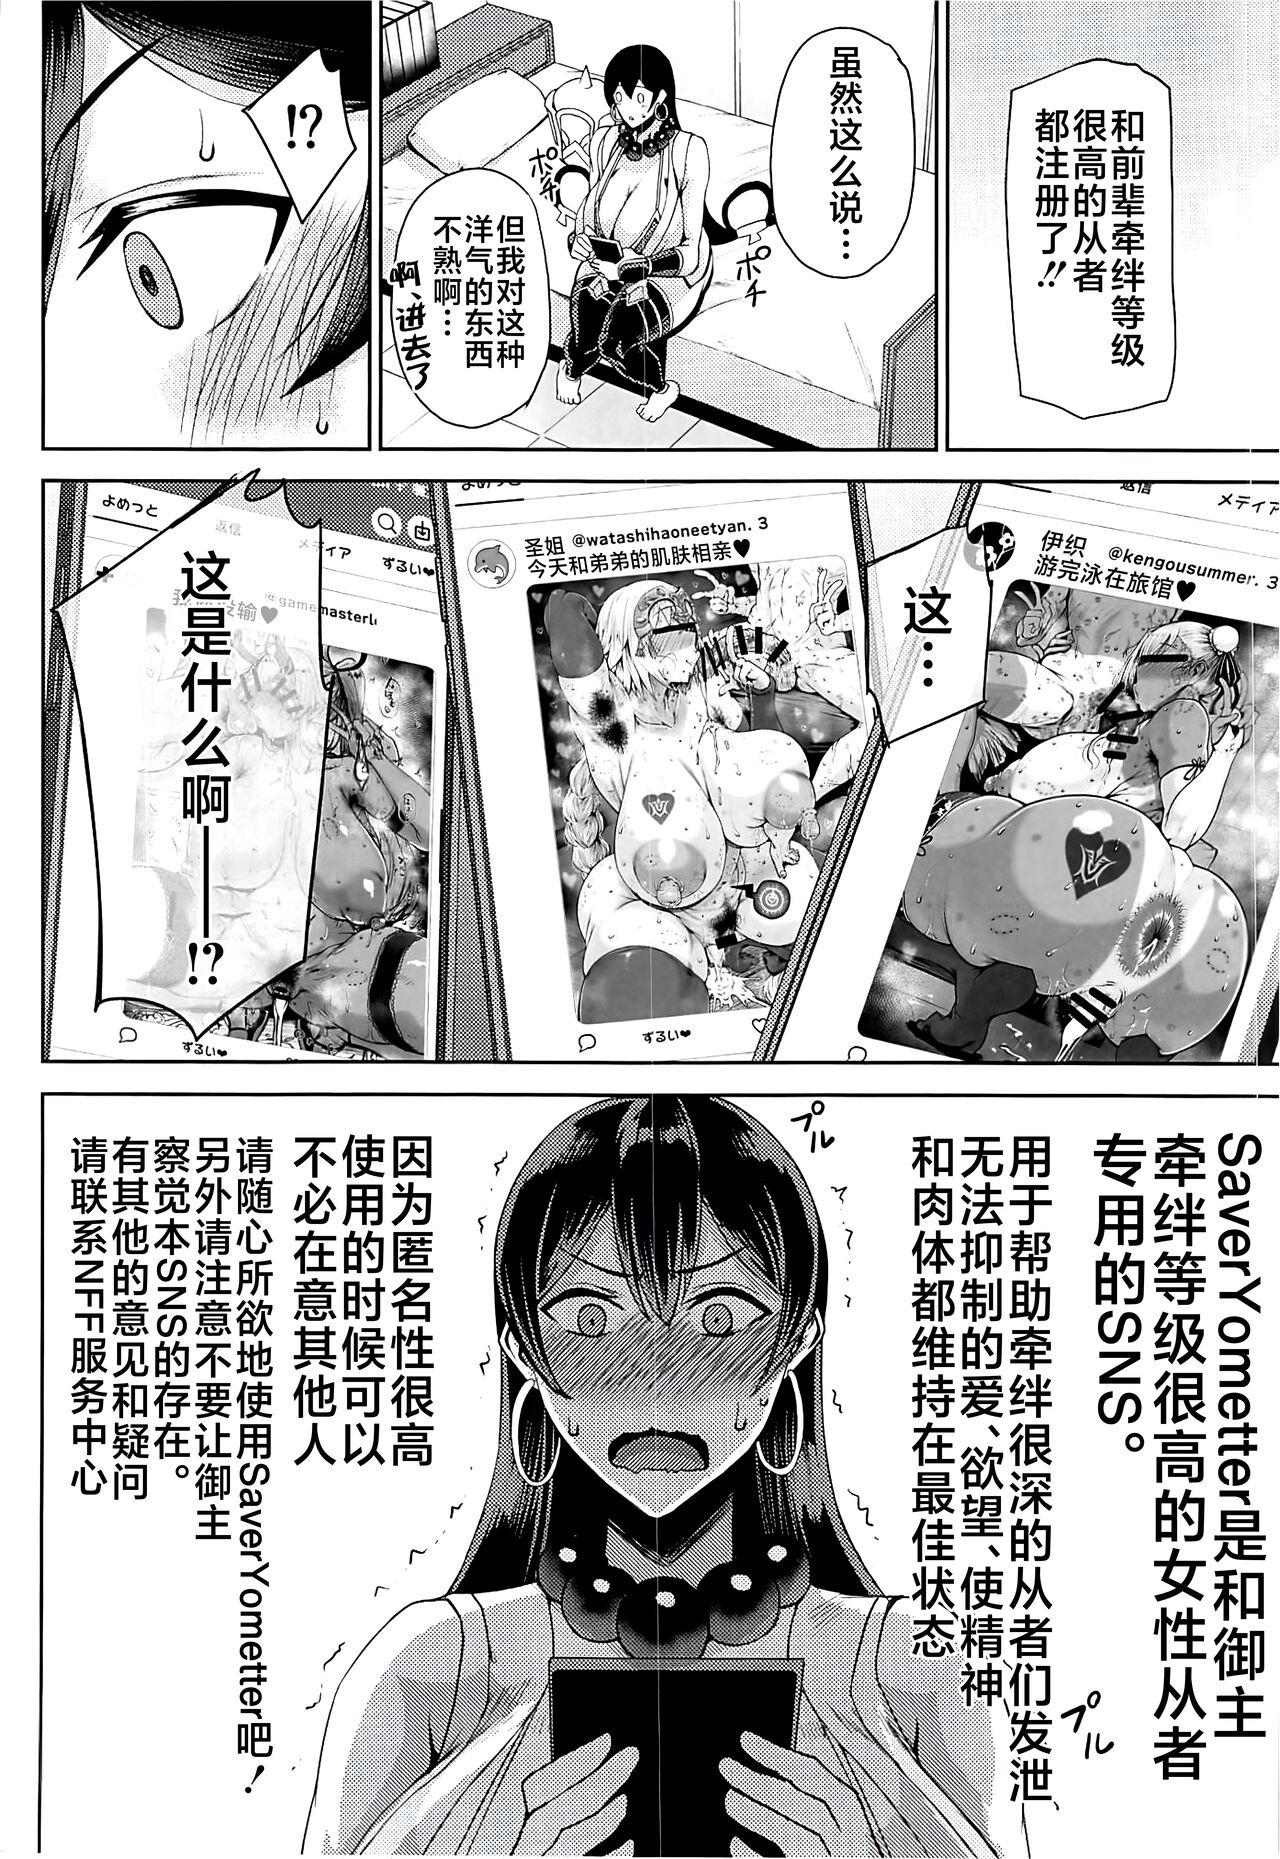 Classic Shugyou Now - Fate grand order Face Fucking - Page 3